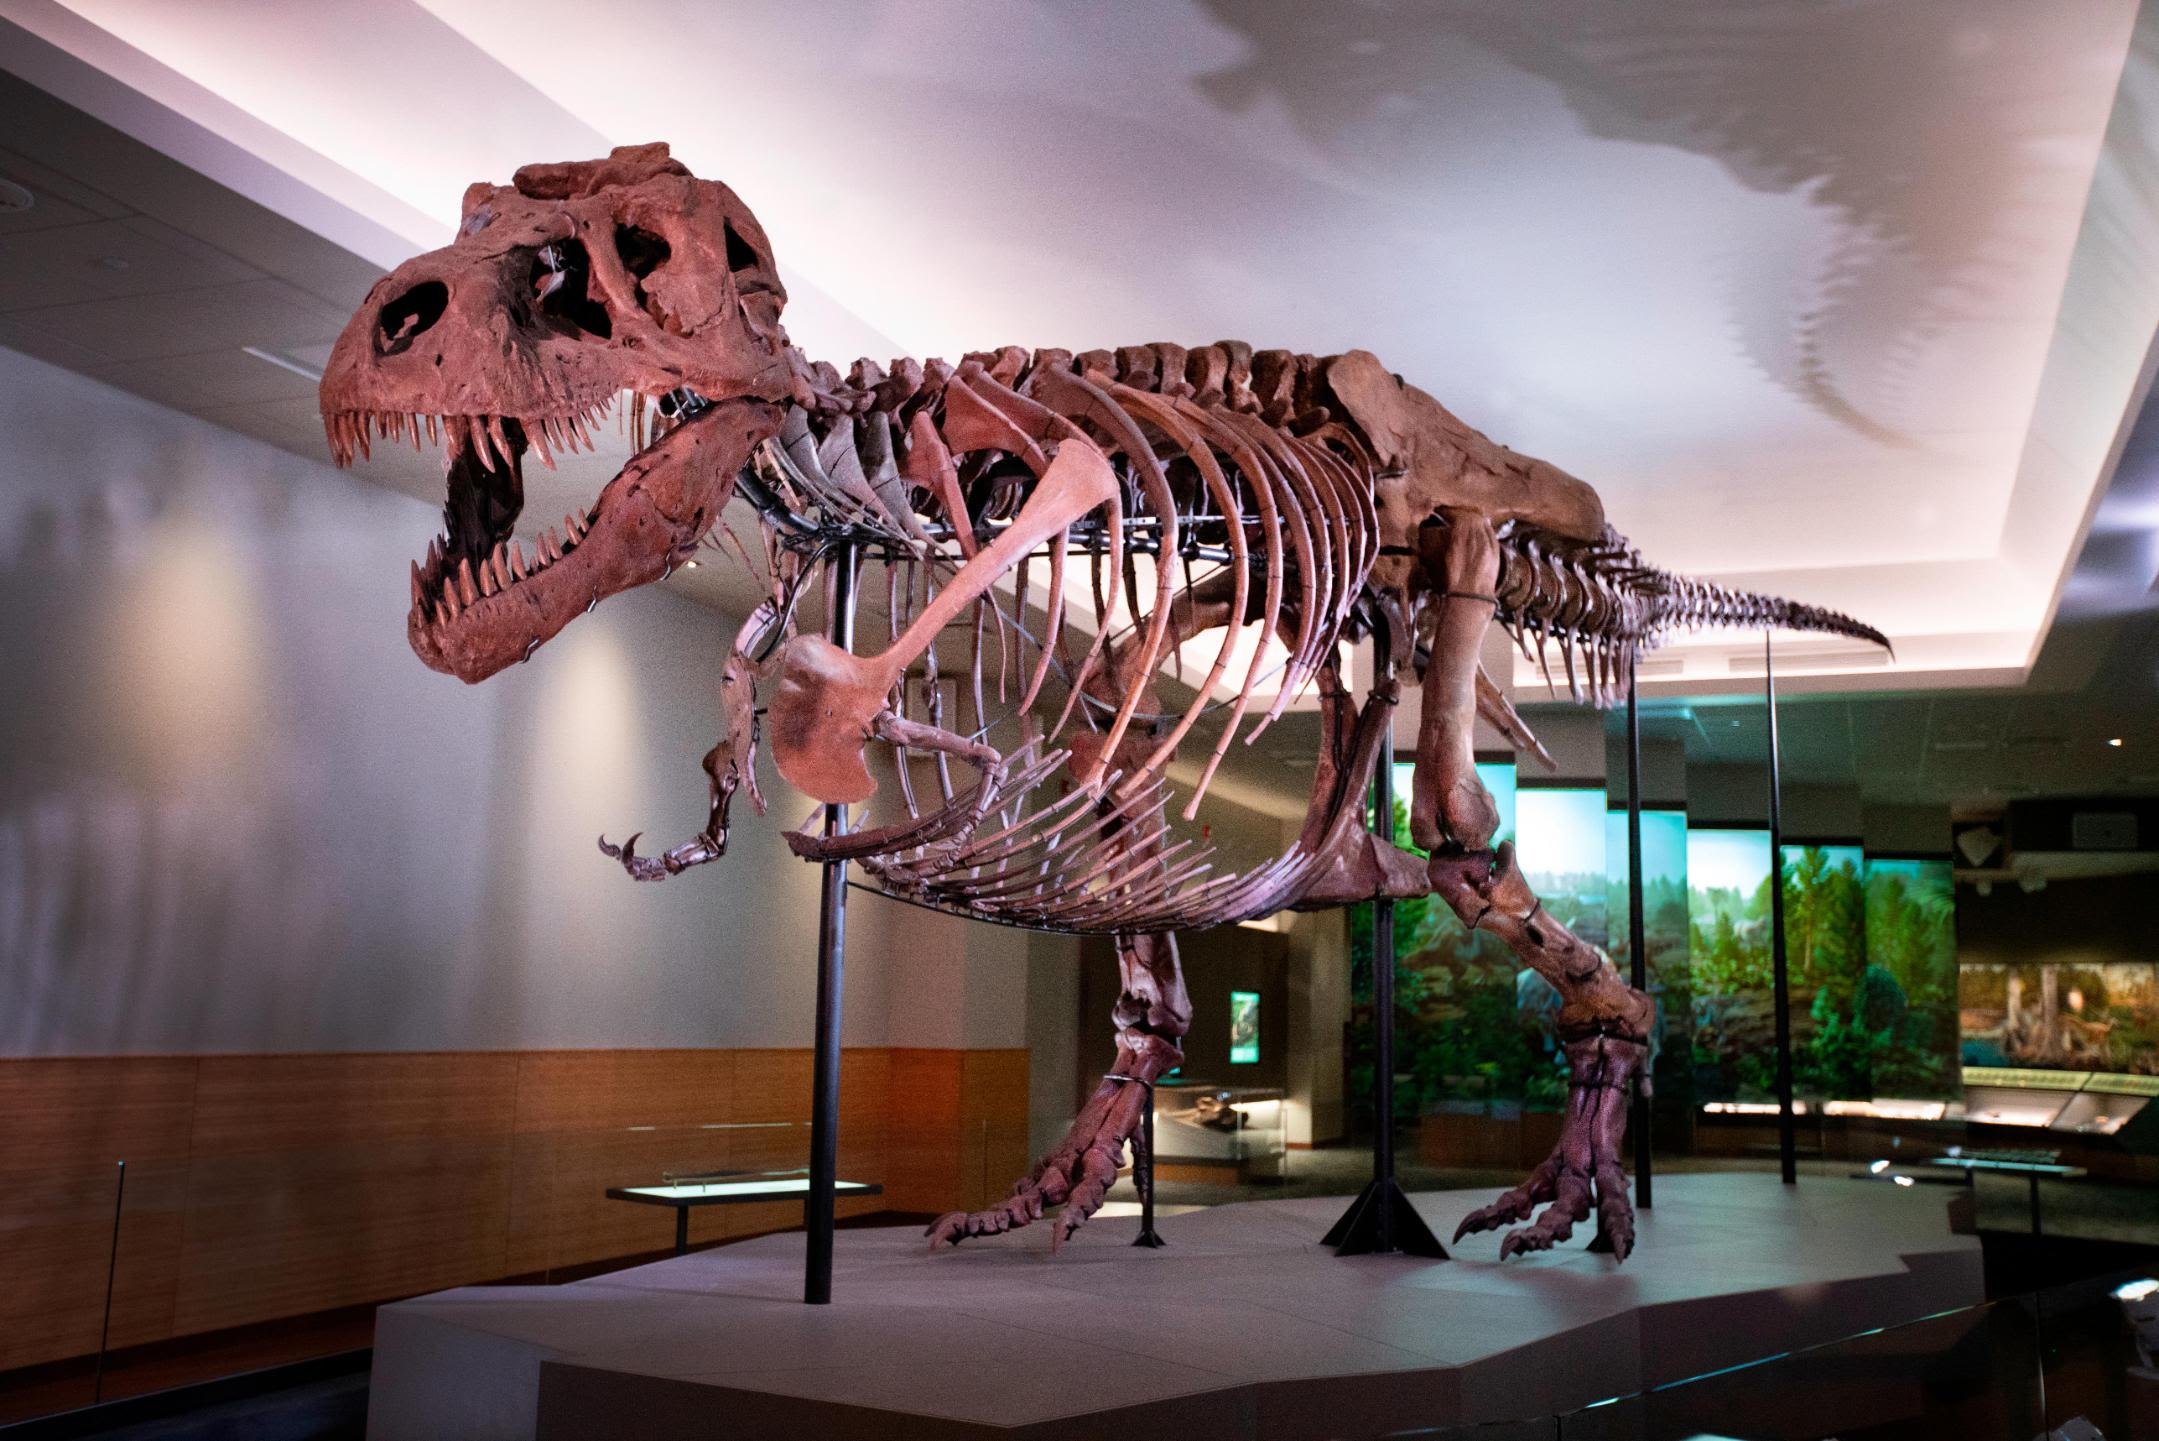 Dinosaurs 'come alive' at Grand Rapids Public Museum's 'Dinosaurs  Unearthed' exhibit 